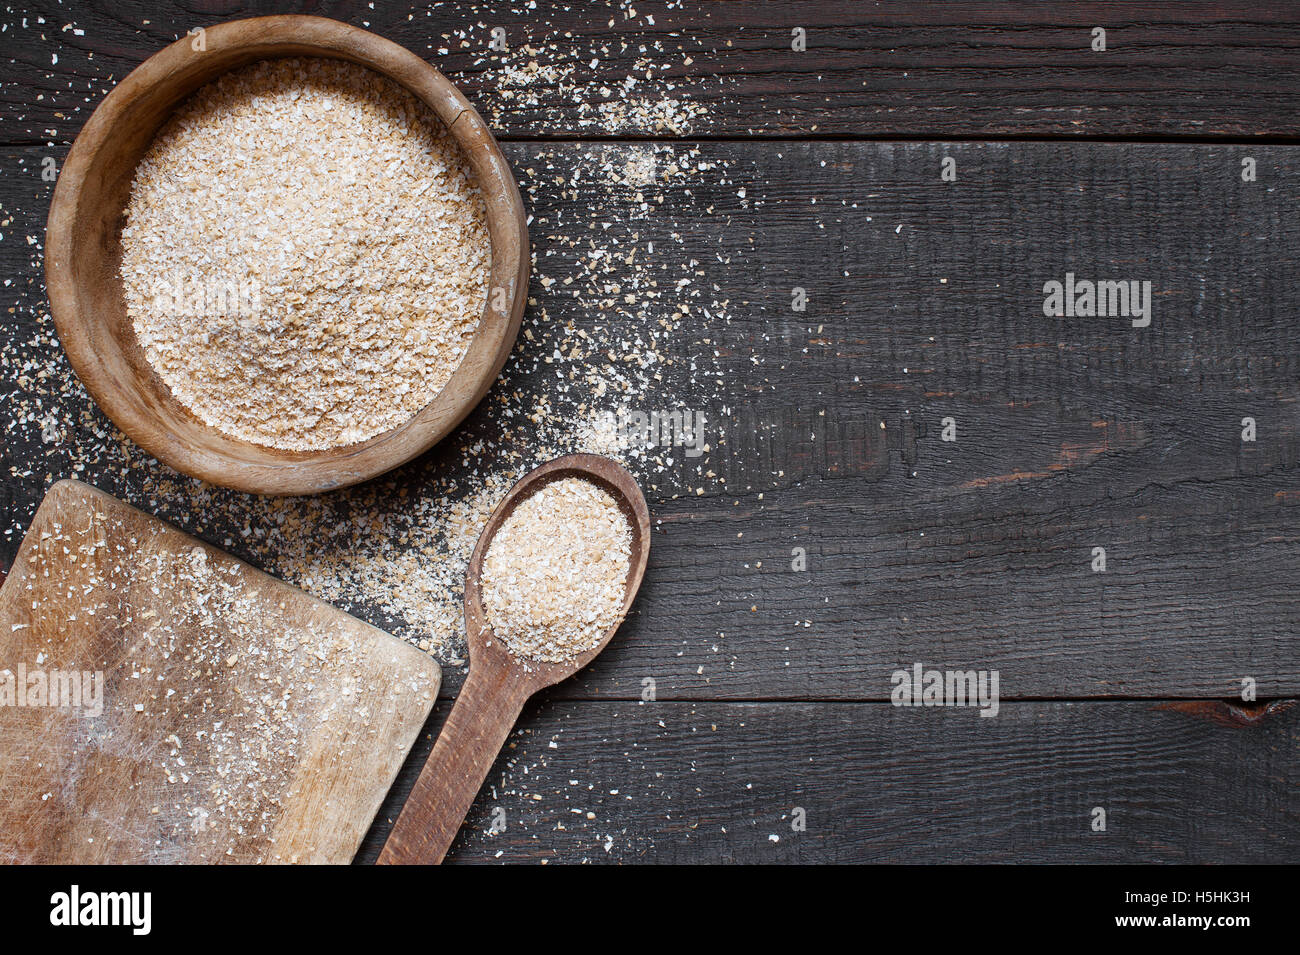 Oat bran in the wooden bowl on the dark table Stock Photo